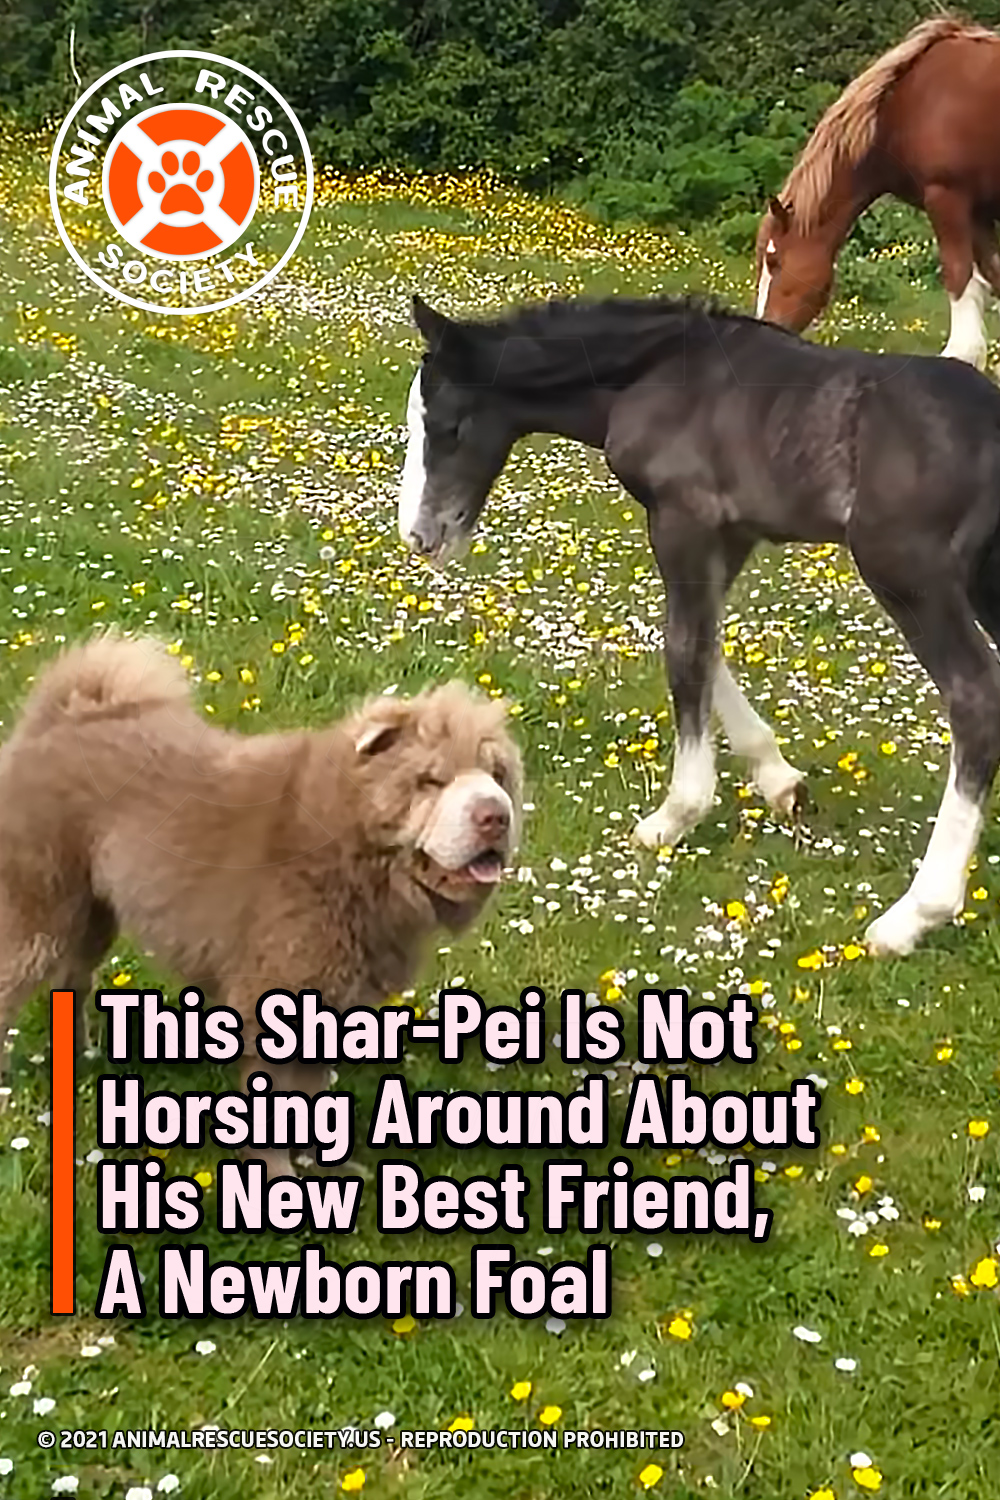 This Shar-Pei Is Not Horsing Around About His New Best Friend, A Newborn Foal